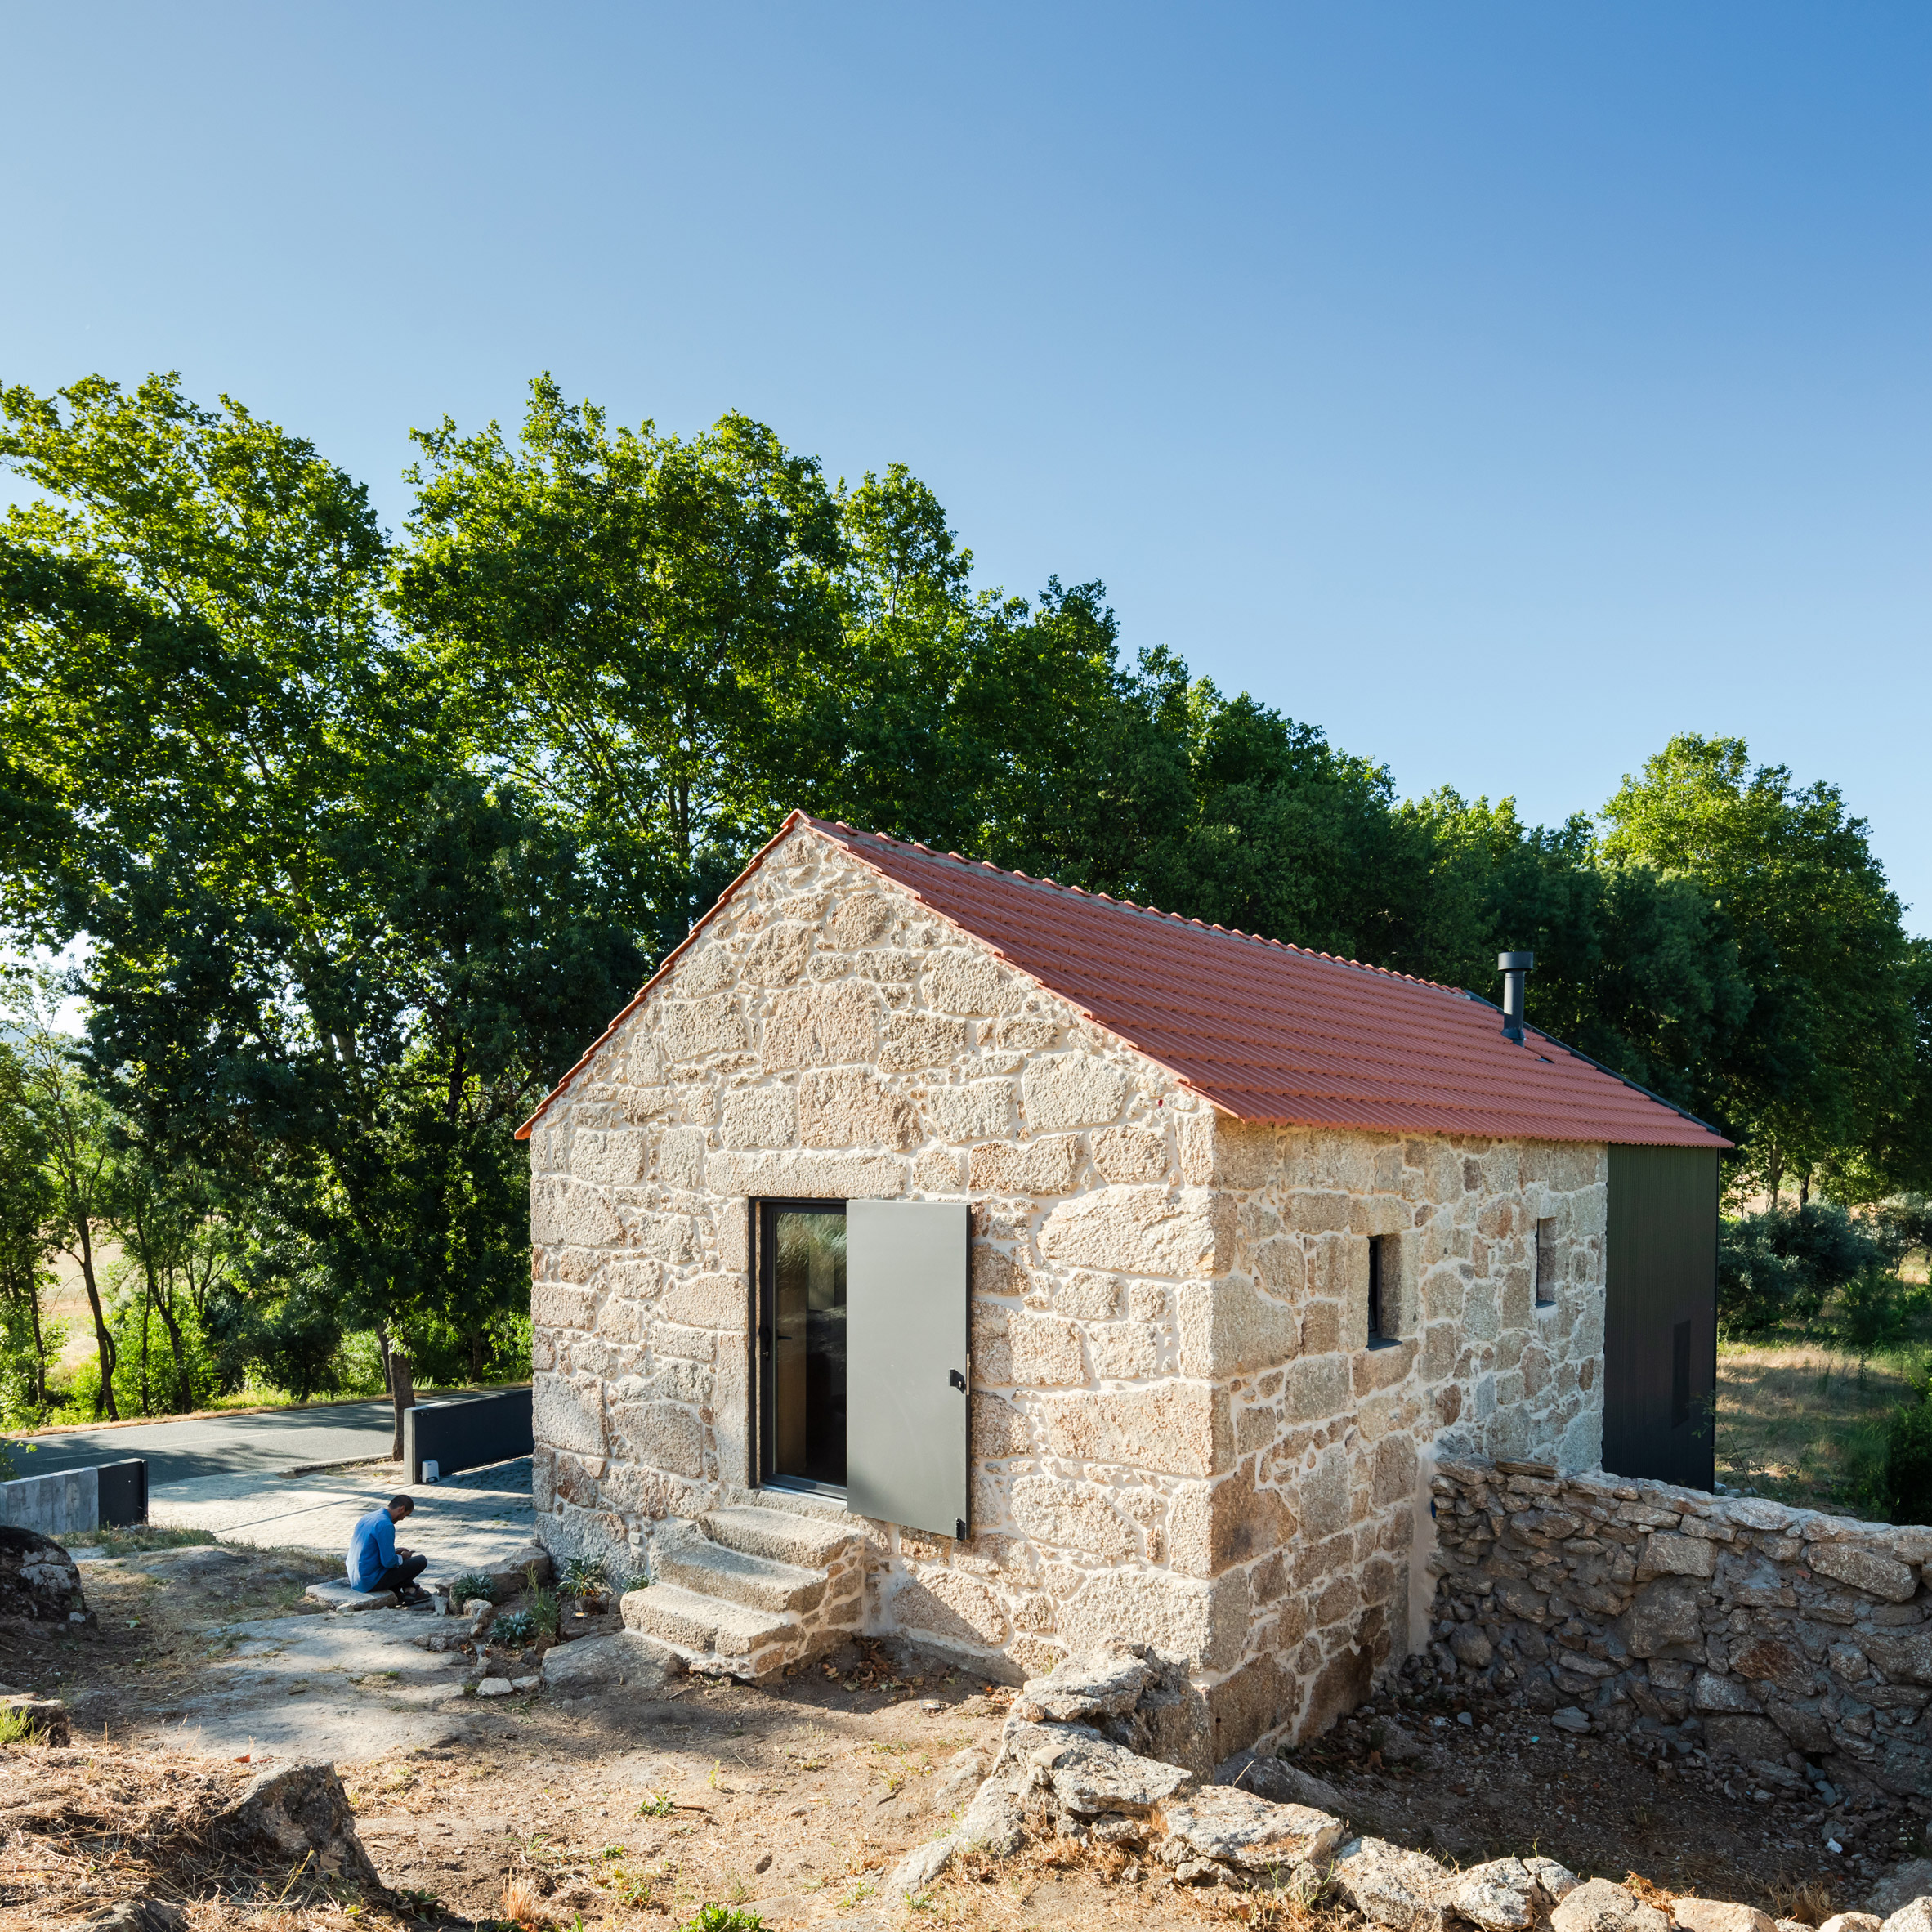 Restored, rustic and rural mini cottage in typical Portuguese